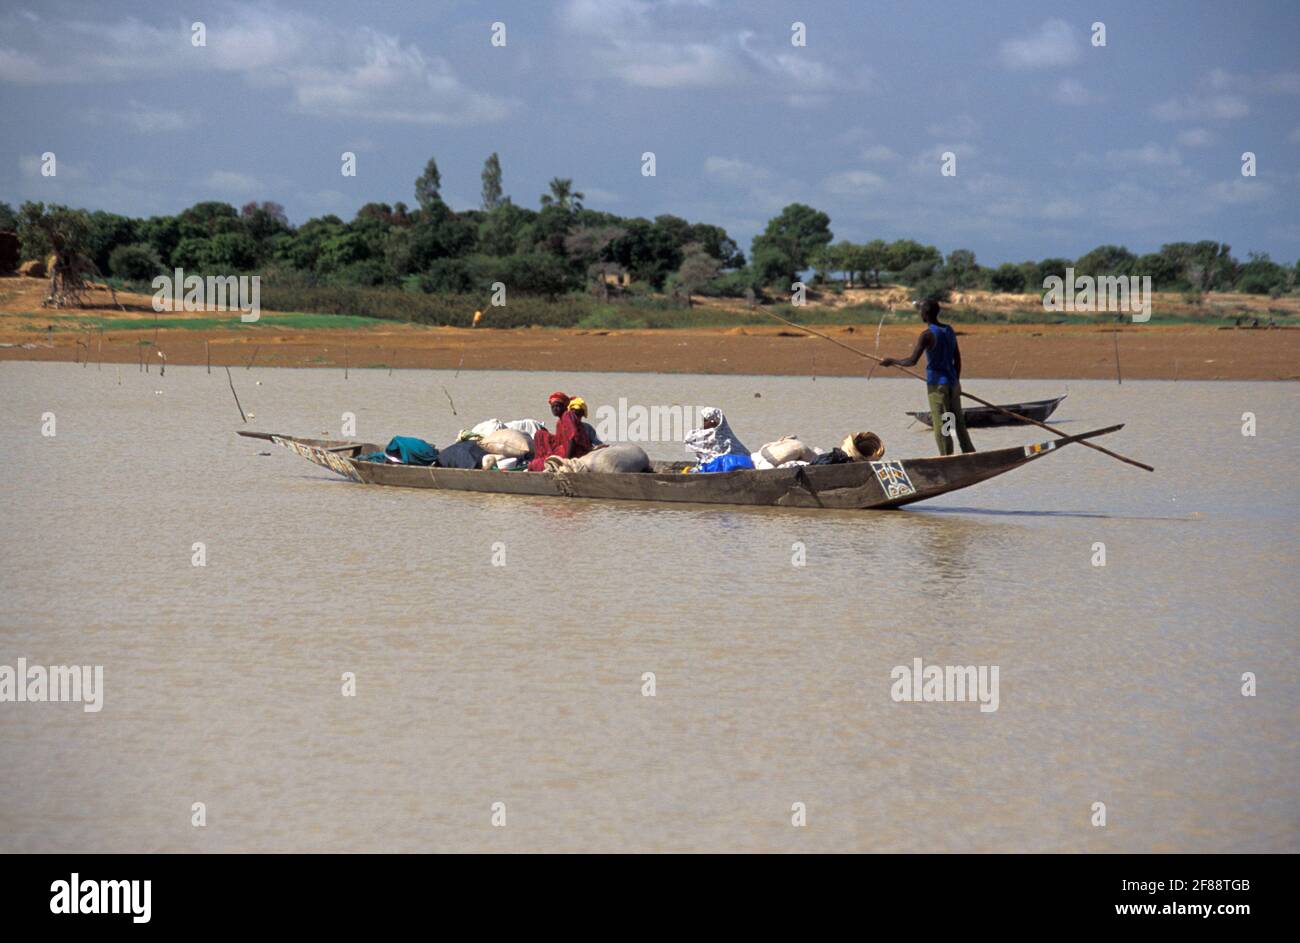 Transporting passengers in a pirogue in Bani river, Mali Stock Photo